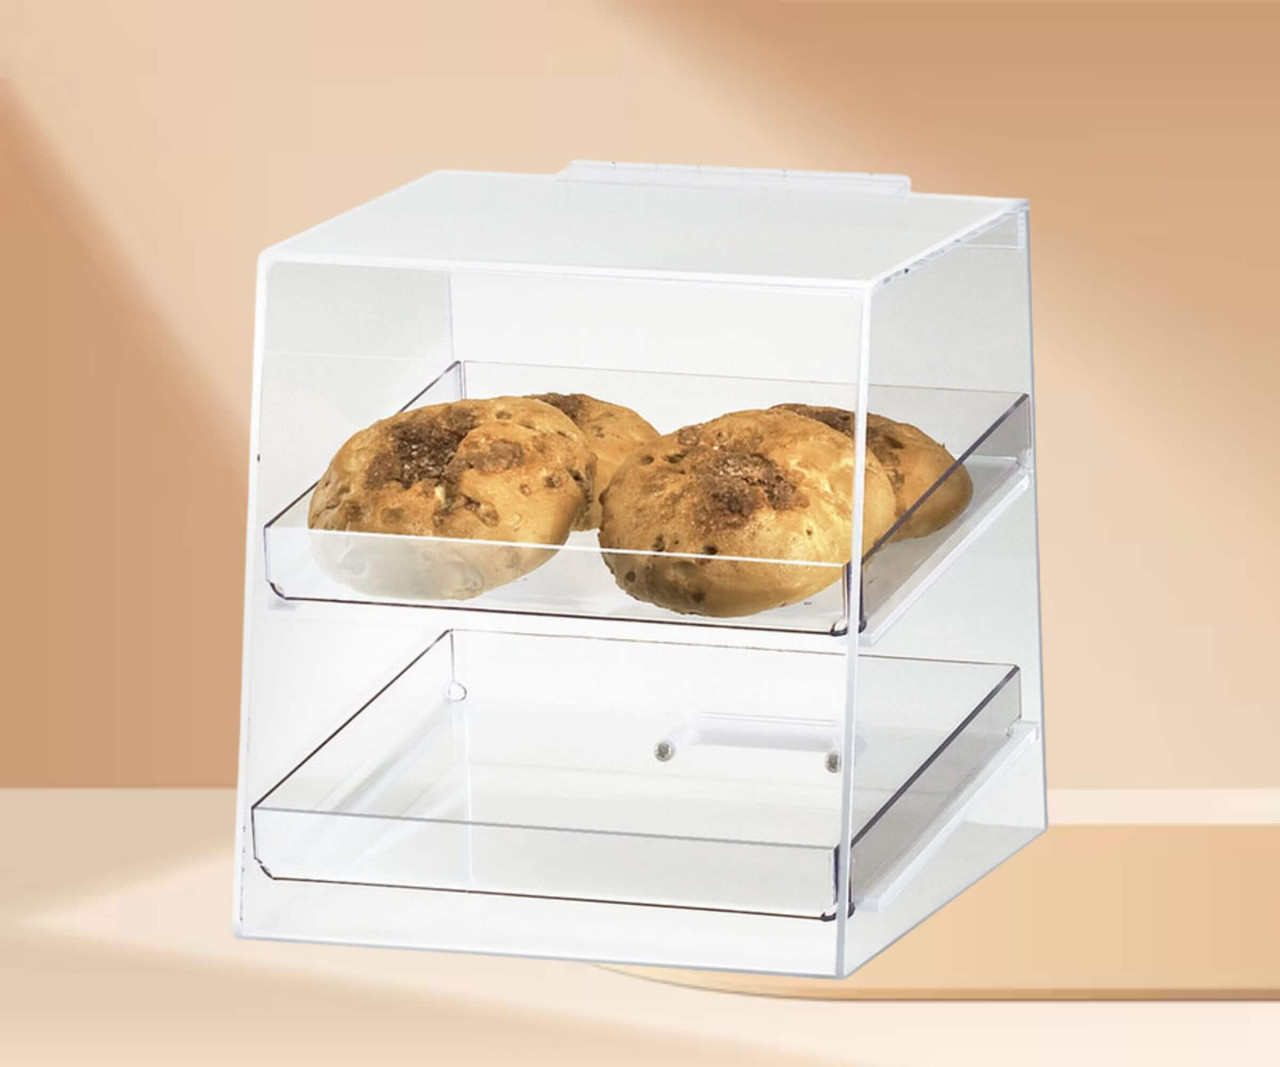 Cal-Mil Classic 10" x 10" x 11" Two Tier Acrylic Display Case with Rear Door-Chicken Pieces